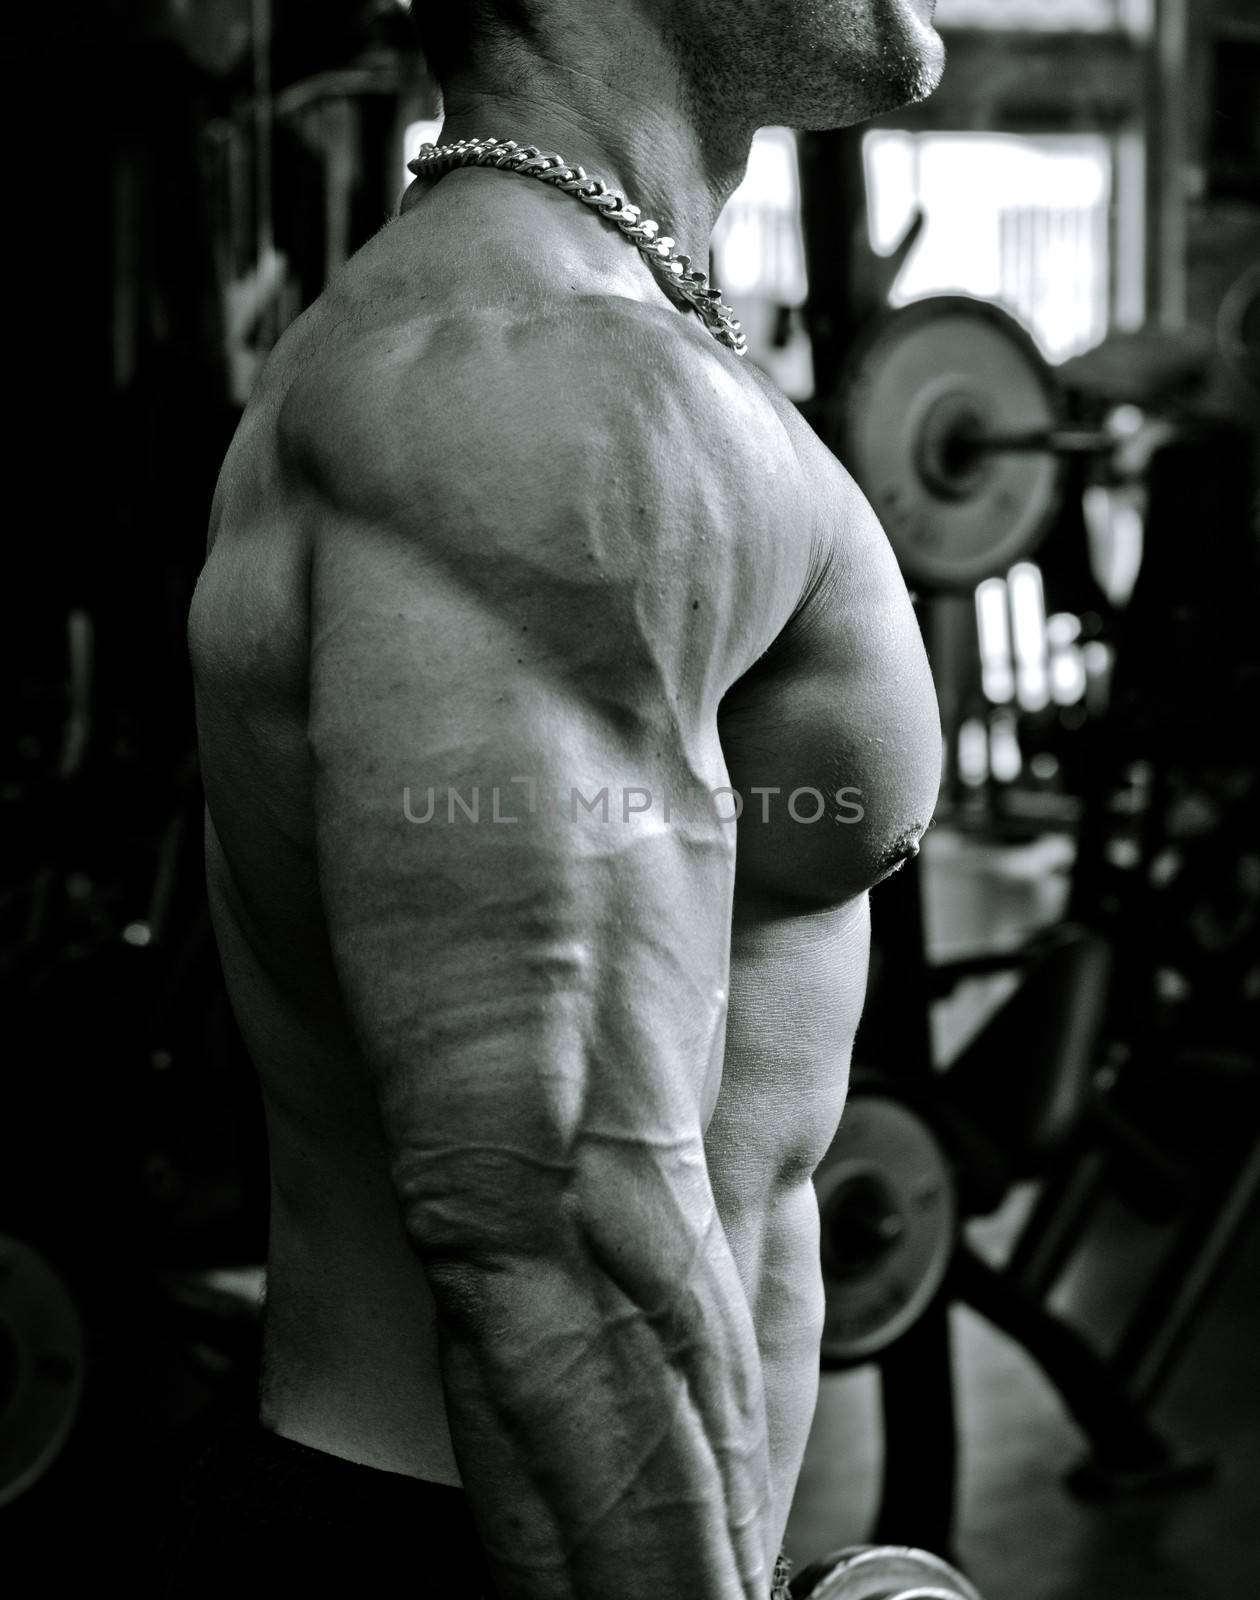 Man working out at the gym, side view of chest, pecs and arm